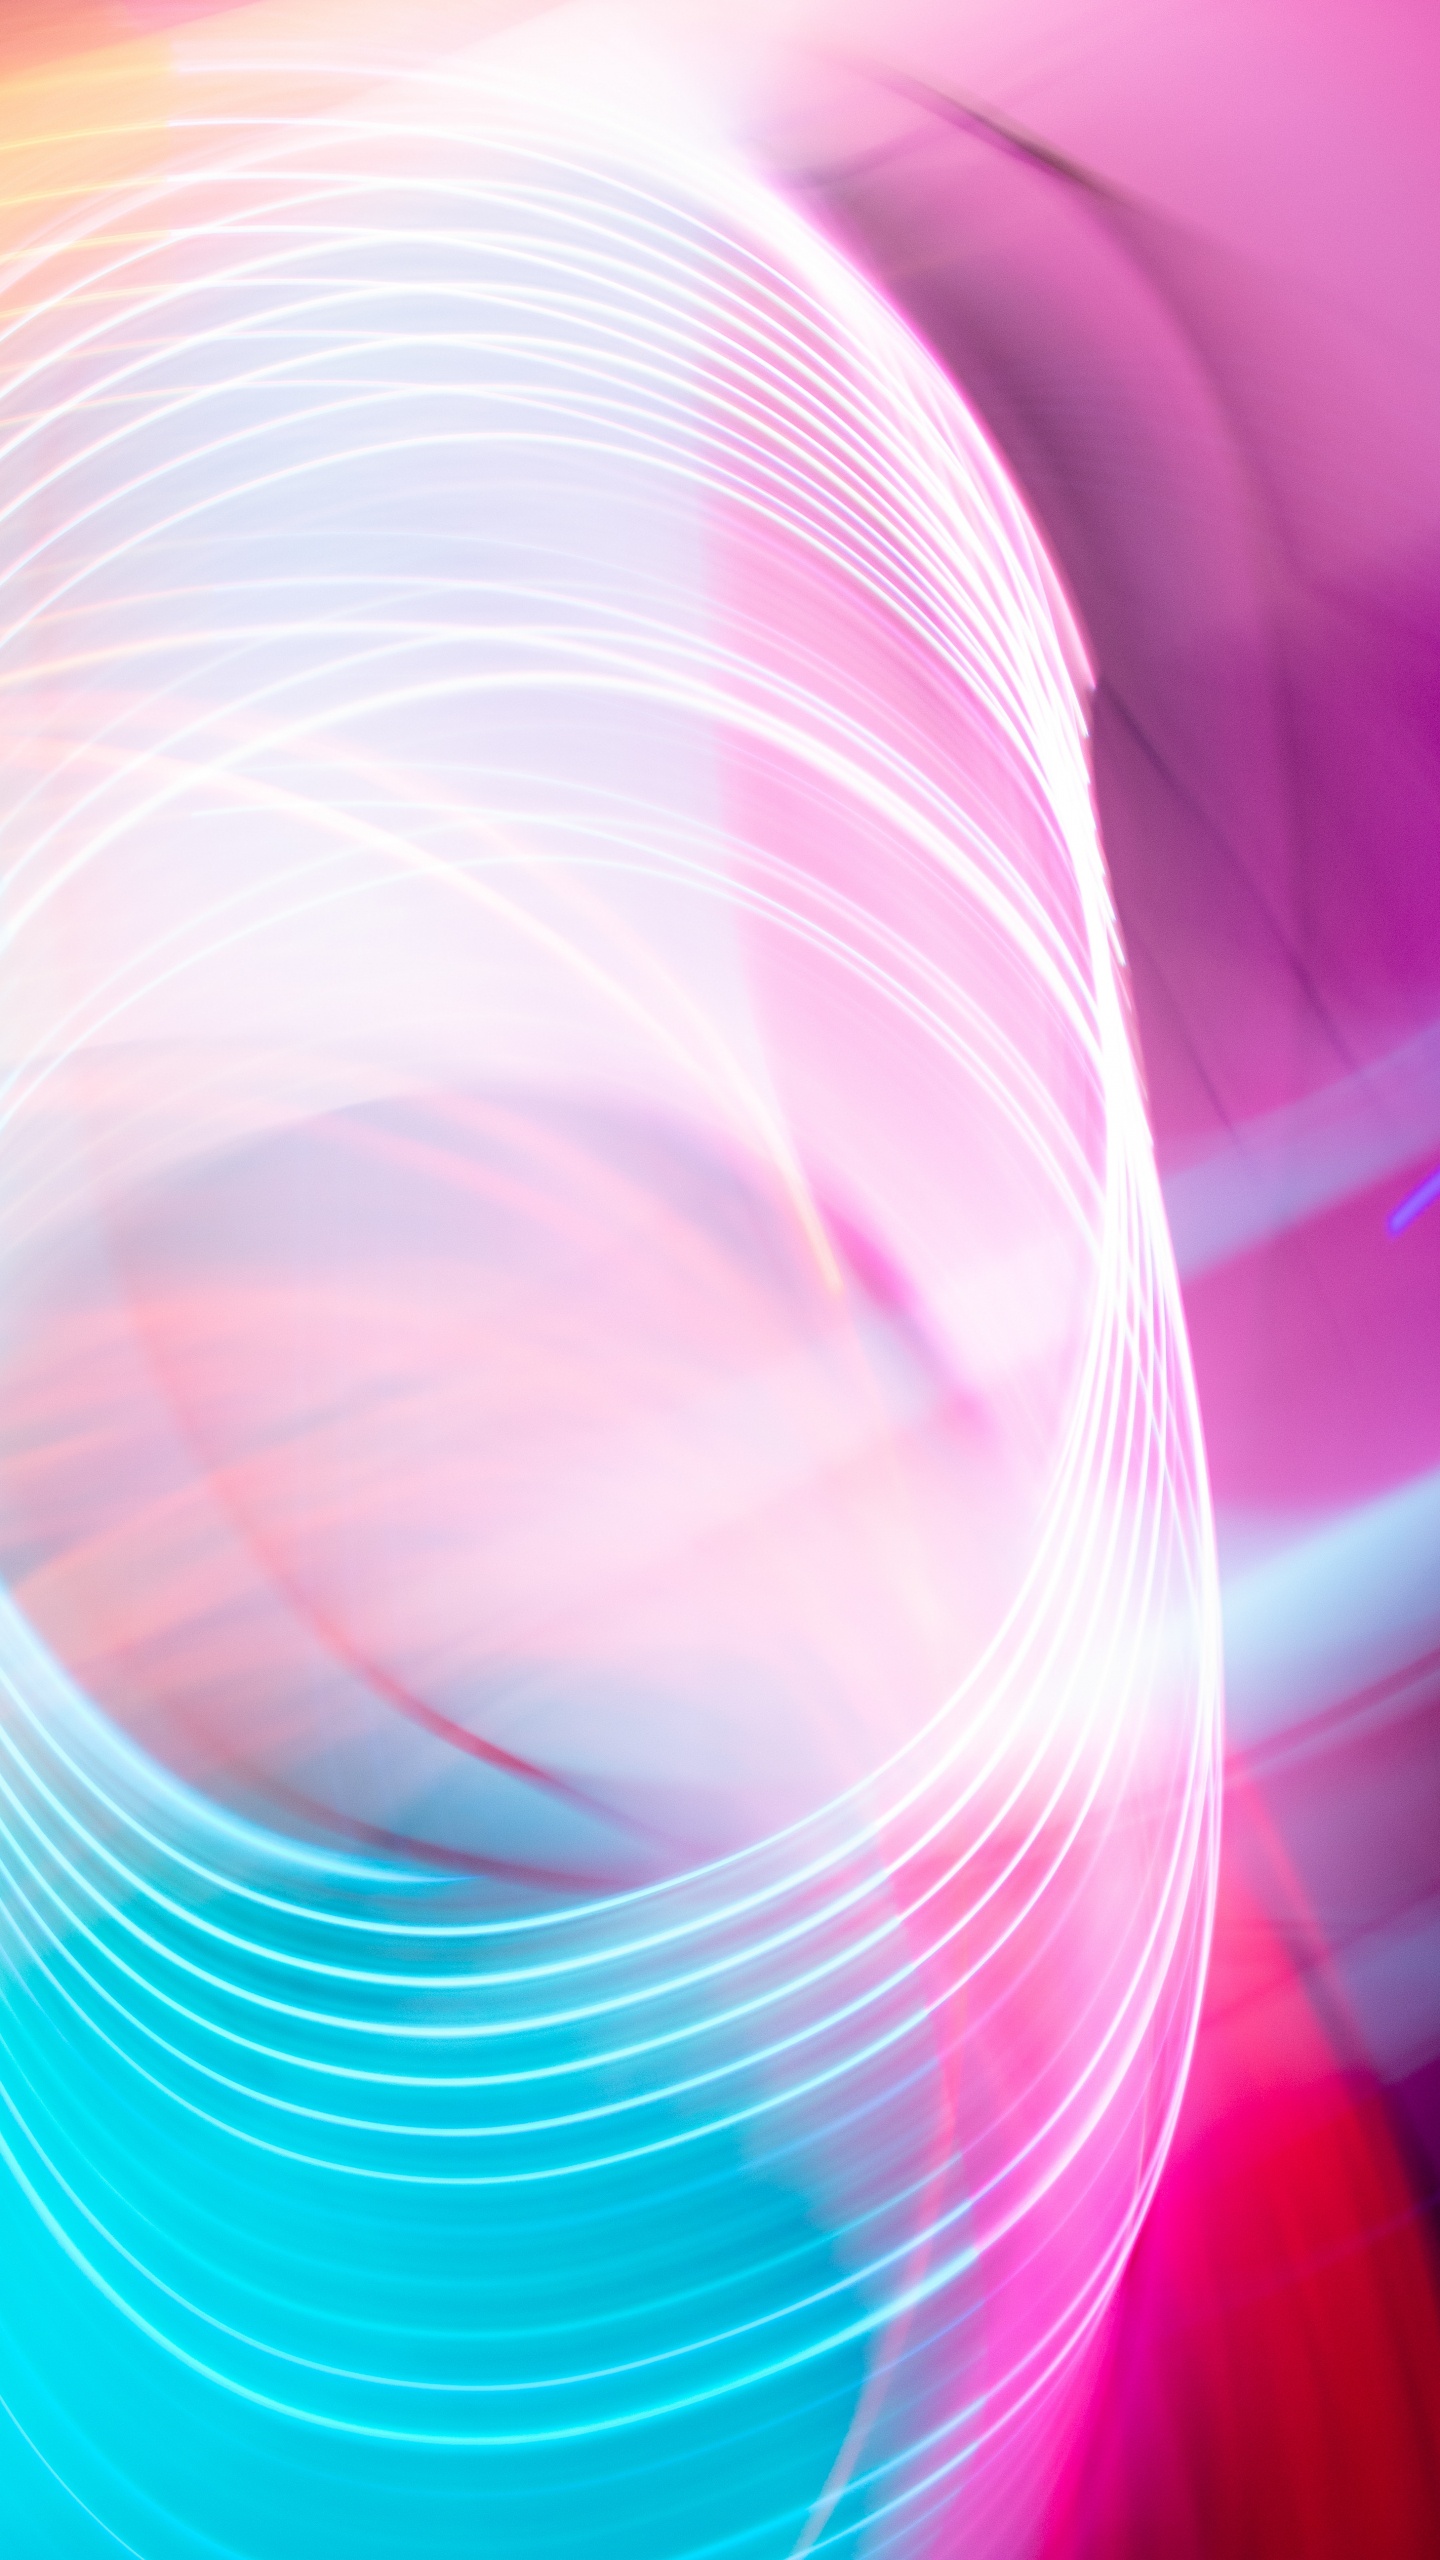 Pink and White Light Digital Wallpaper. Wallpaper in 1440x2560 Resolution